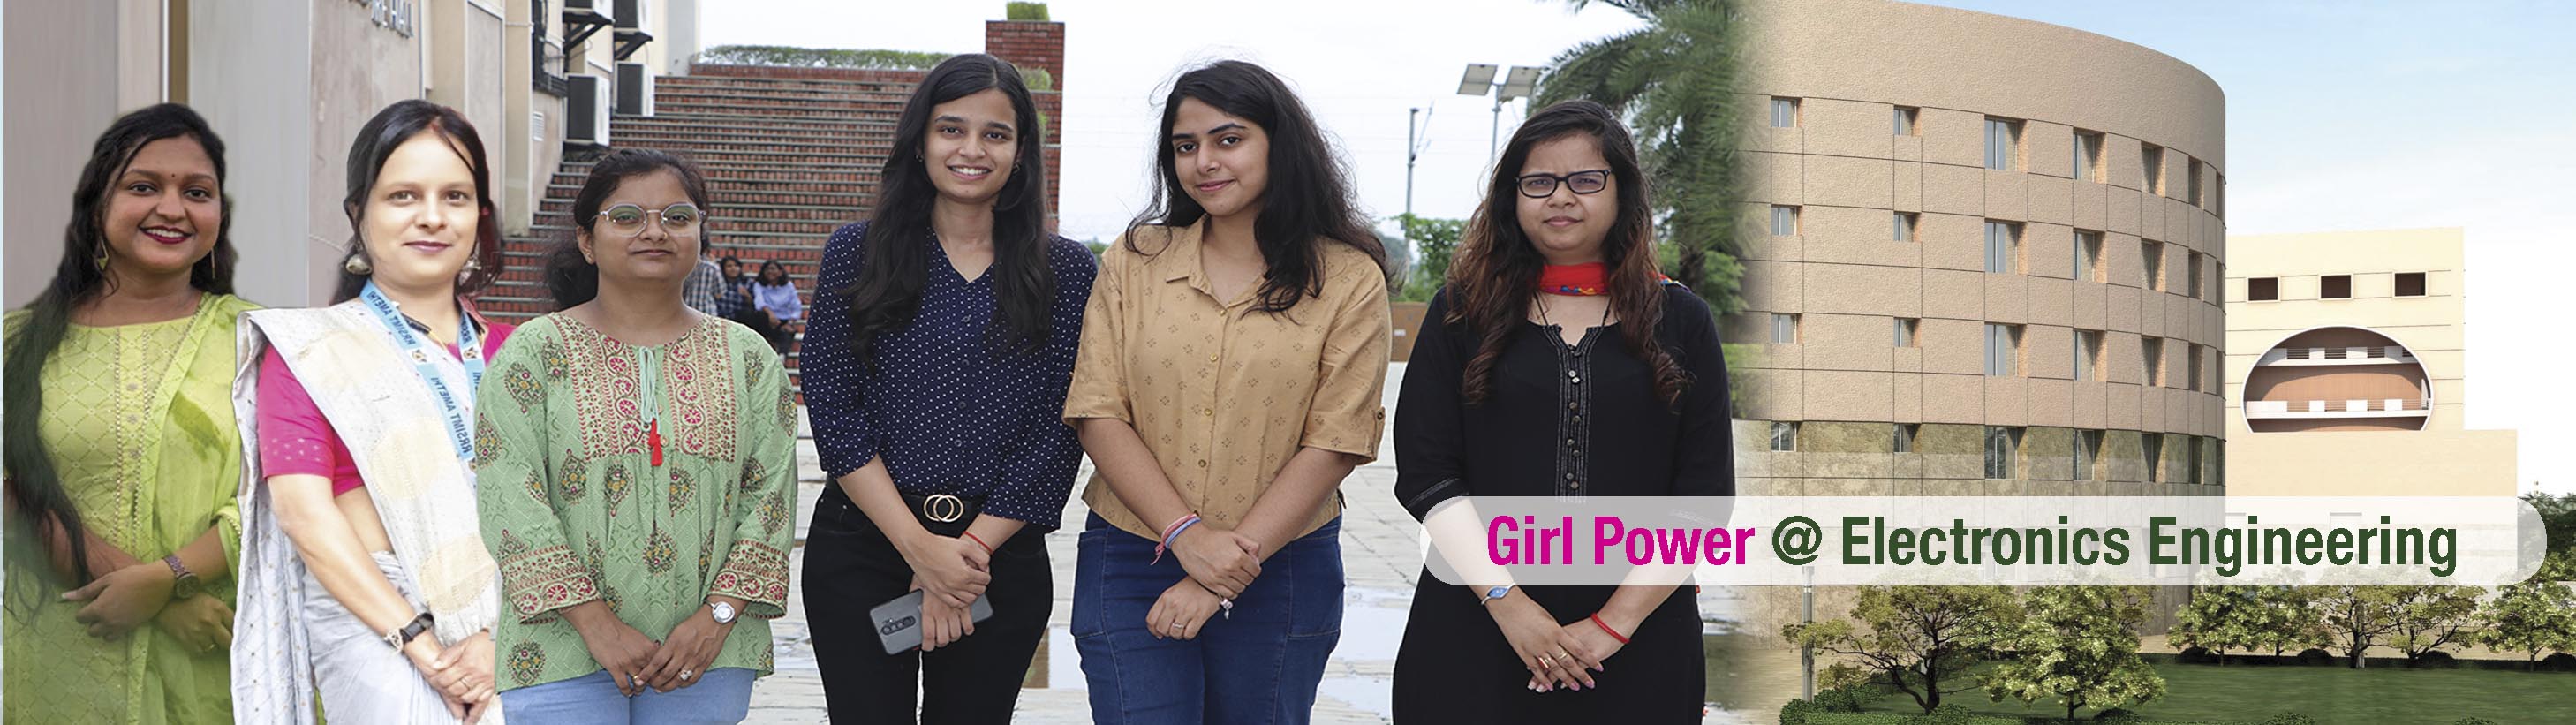 Girl Students - Proud to Represent The Department of Electronics Engineering